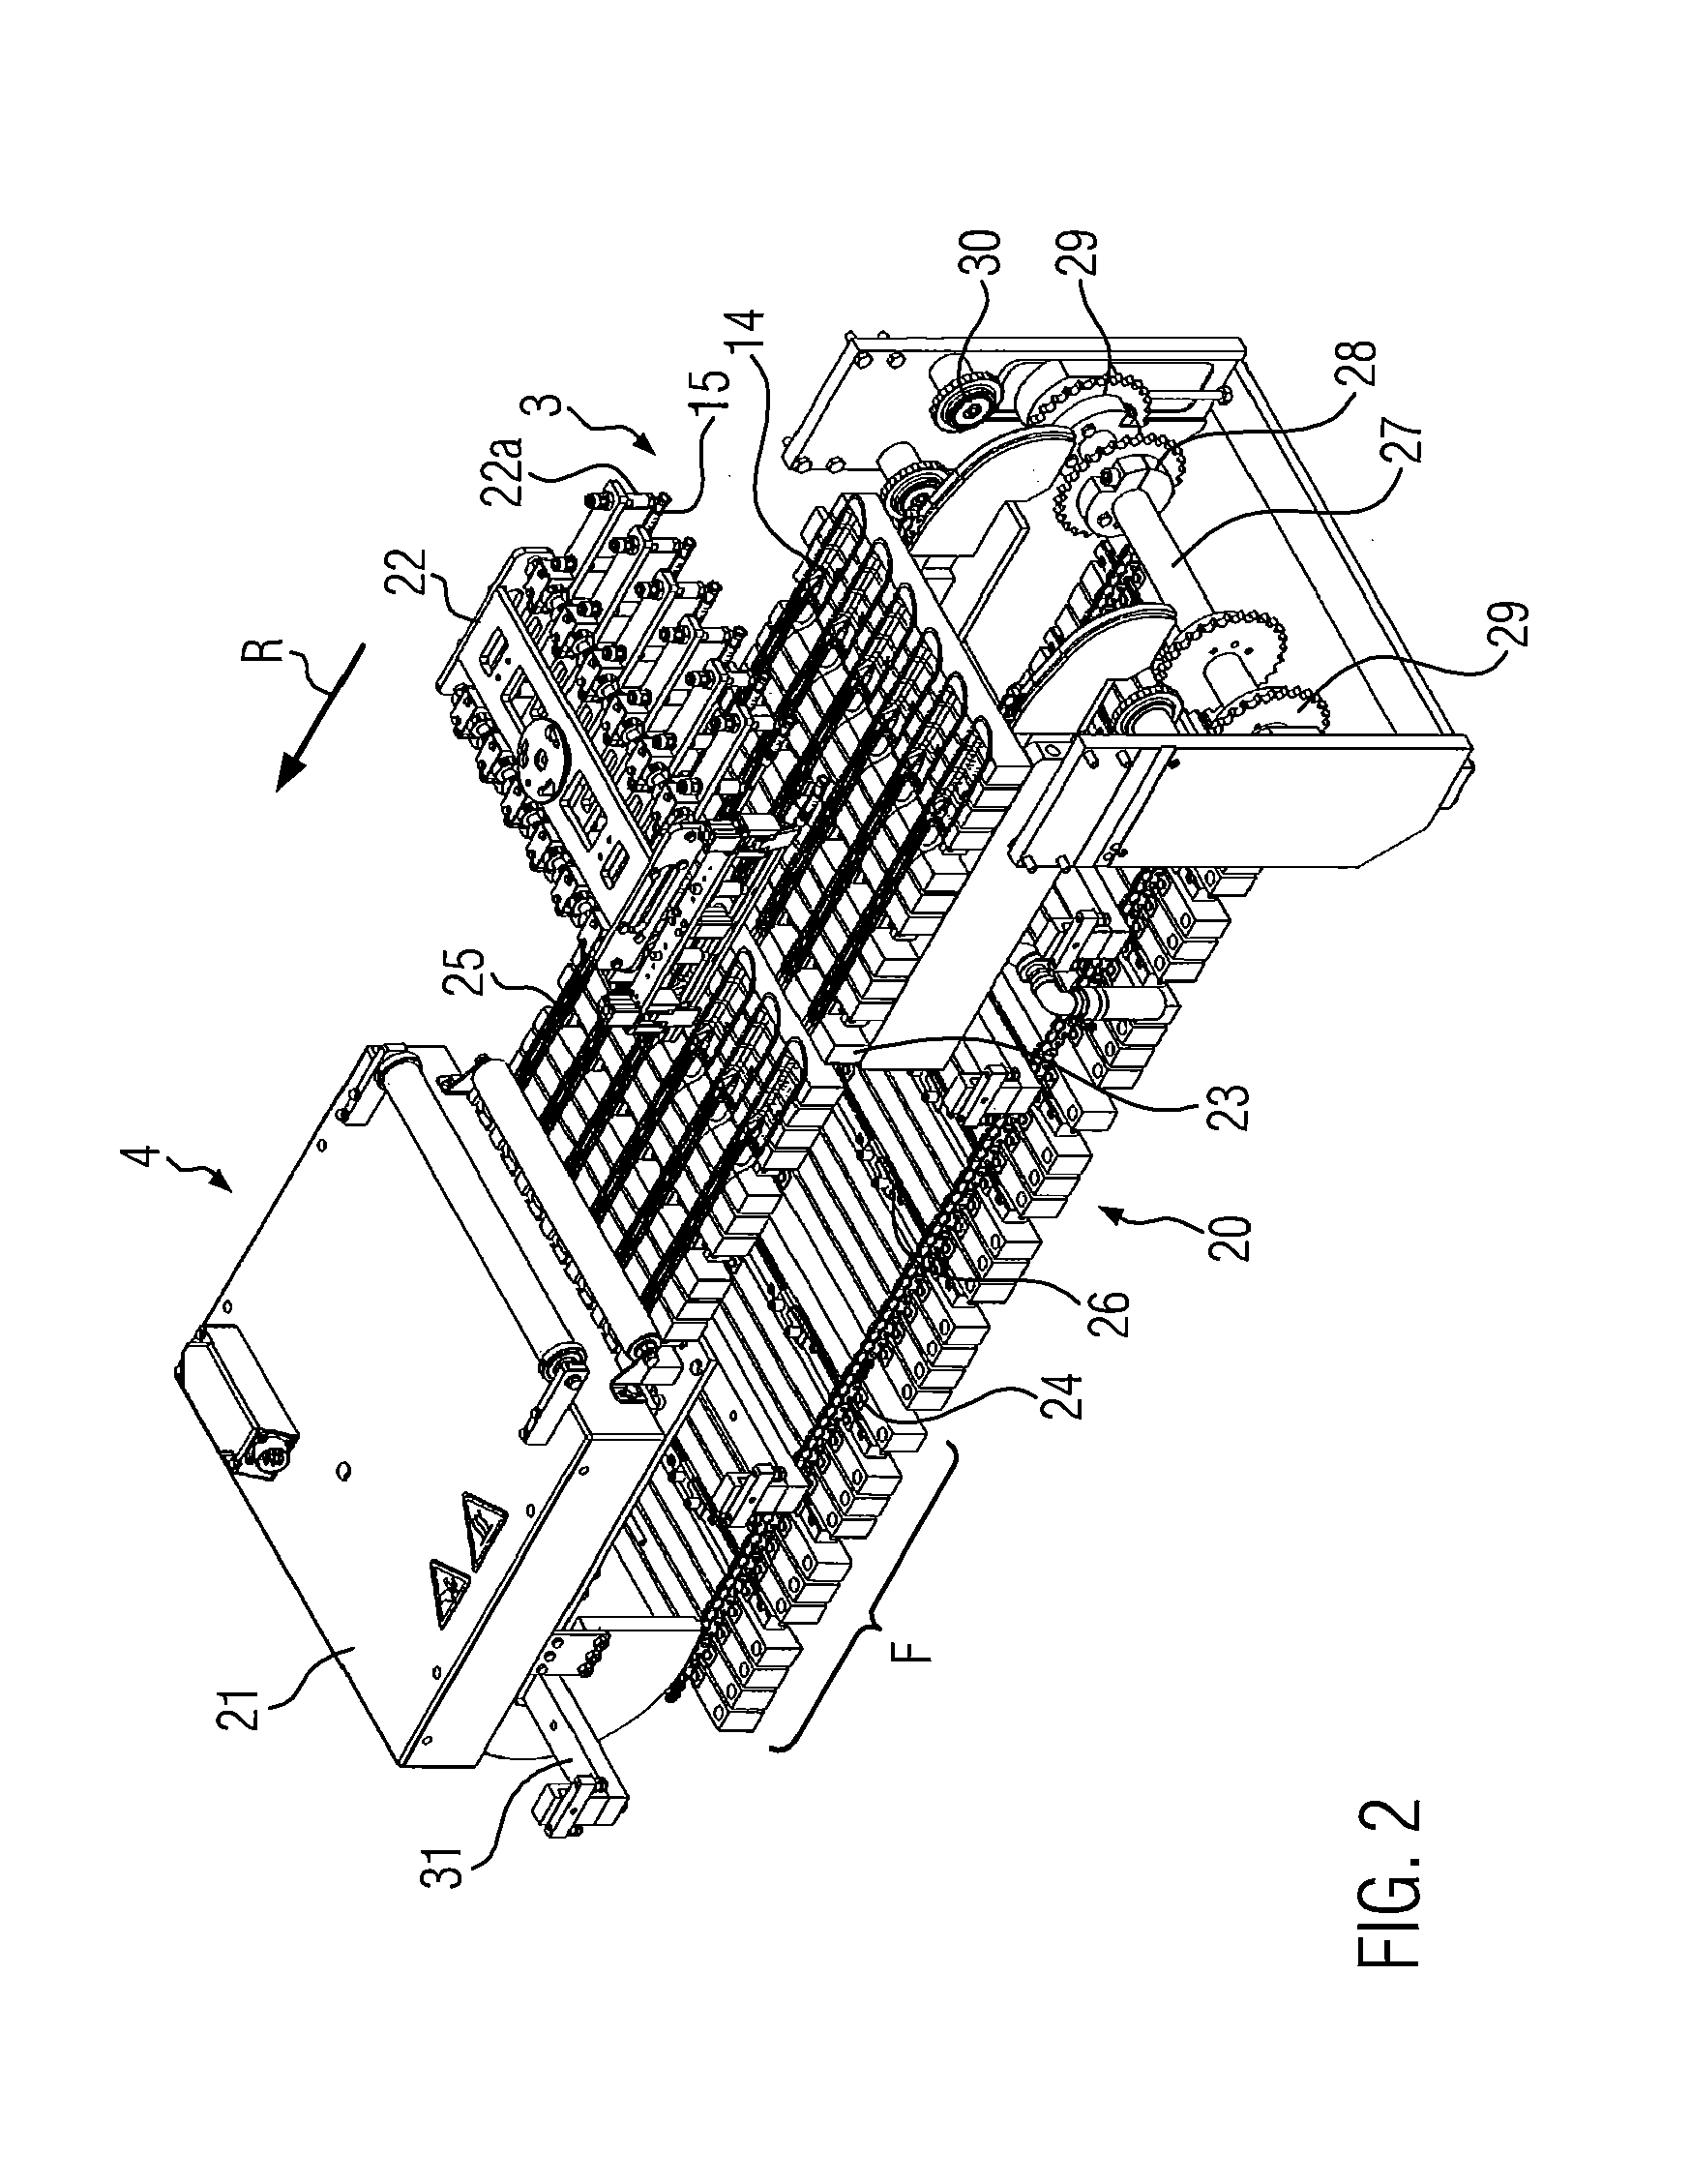 Thermoform packaging machine and method